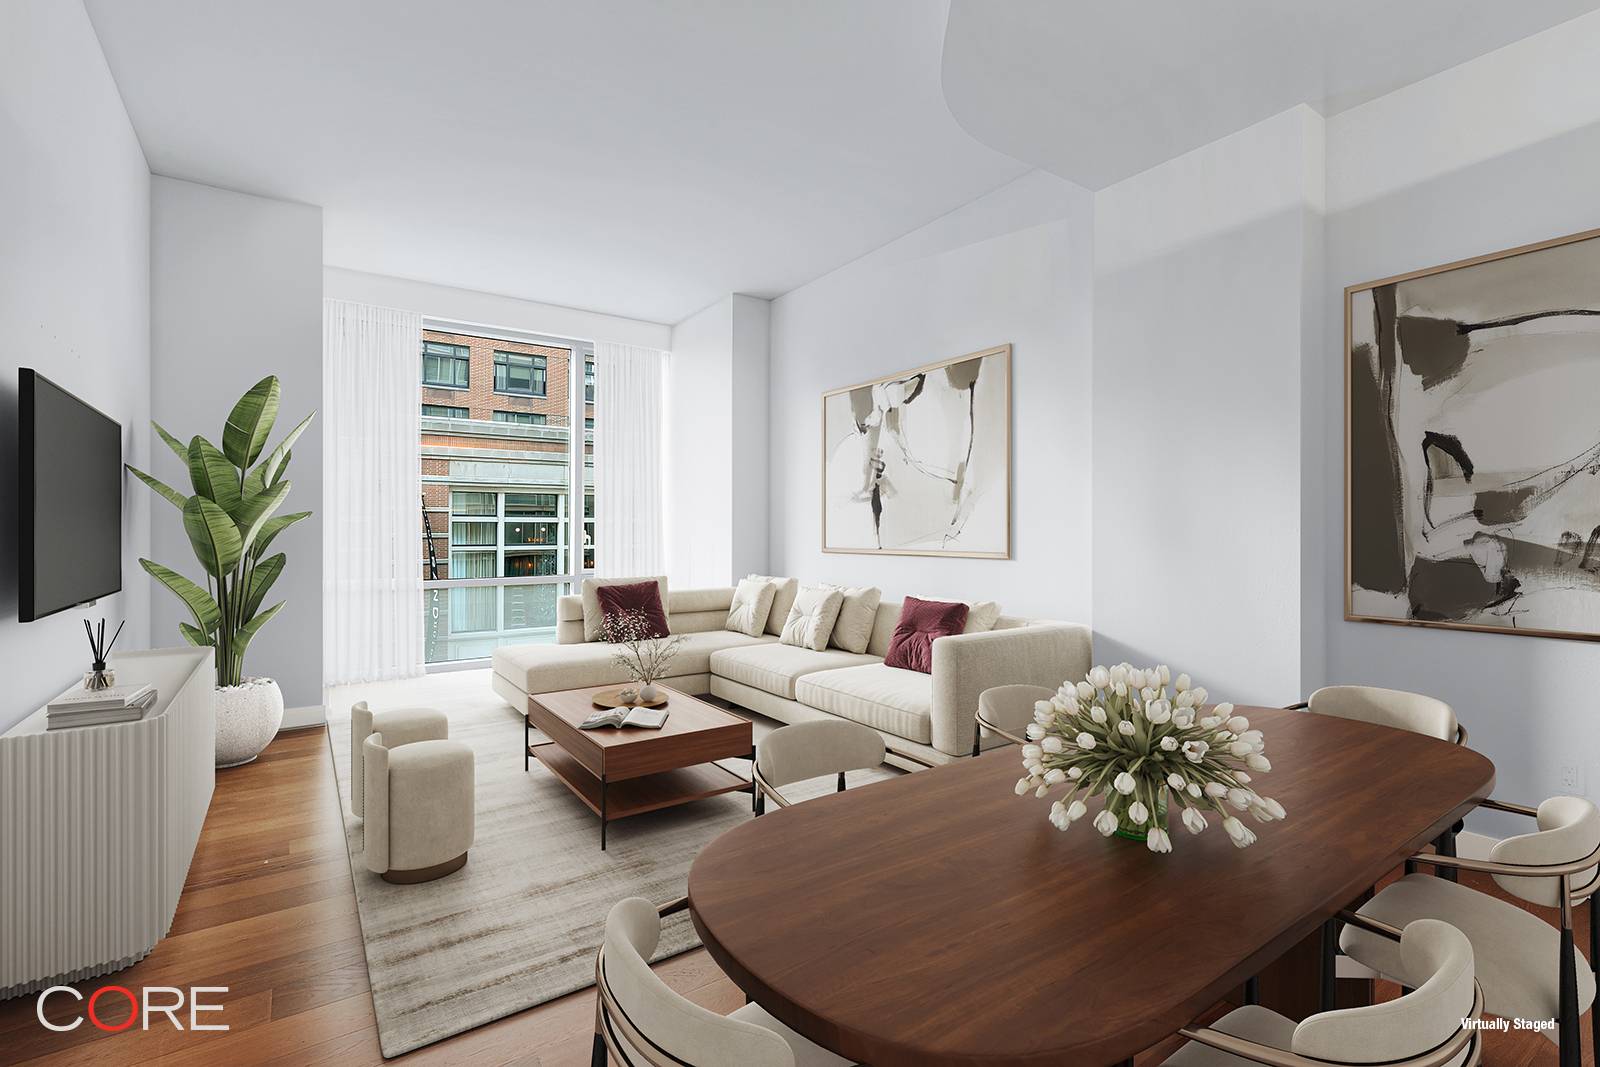 Welcome to a life of quiet luxury in this Gwathmey Siegel designed two bedroom, two bathroom residence that resonates classic Soho living enhanced by modern refinement with beautiful finishes throughout.